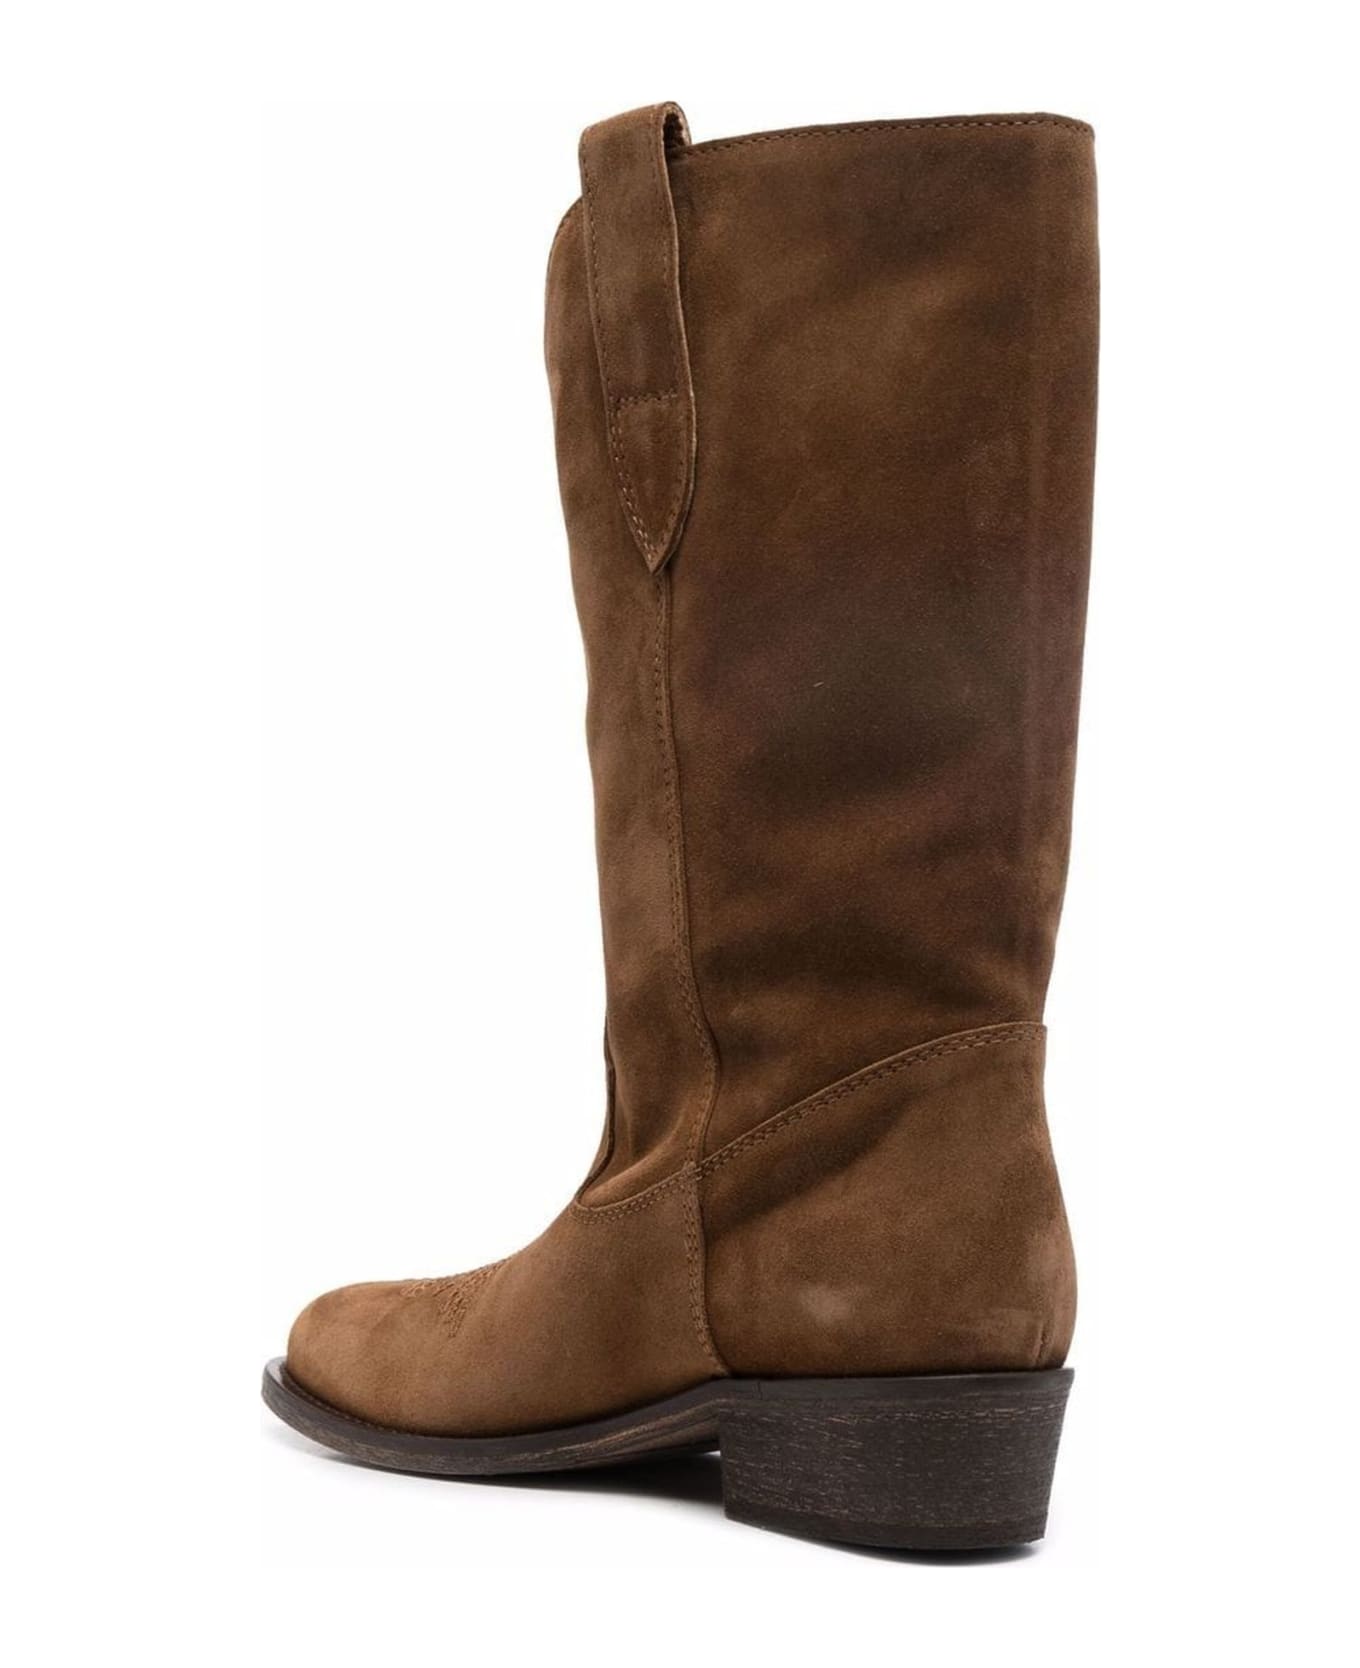 Via Roma 15 Brown Suede Cowboy Boots - Brown ブーツ